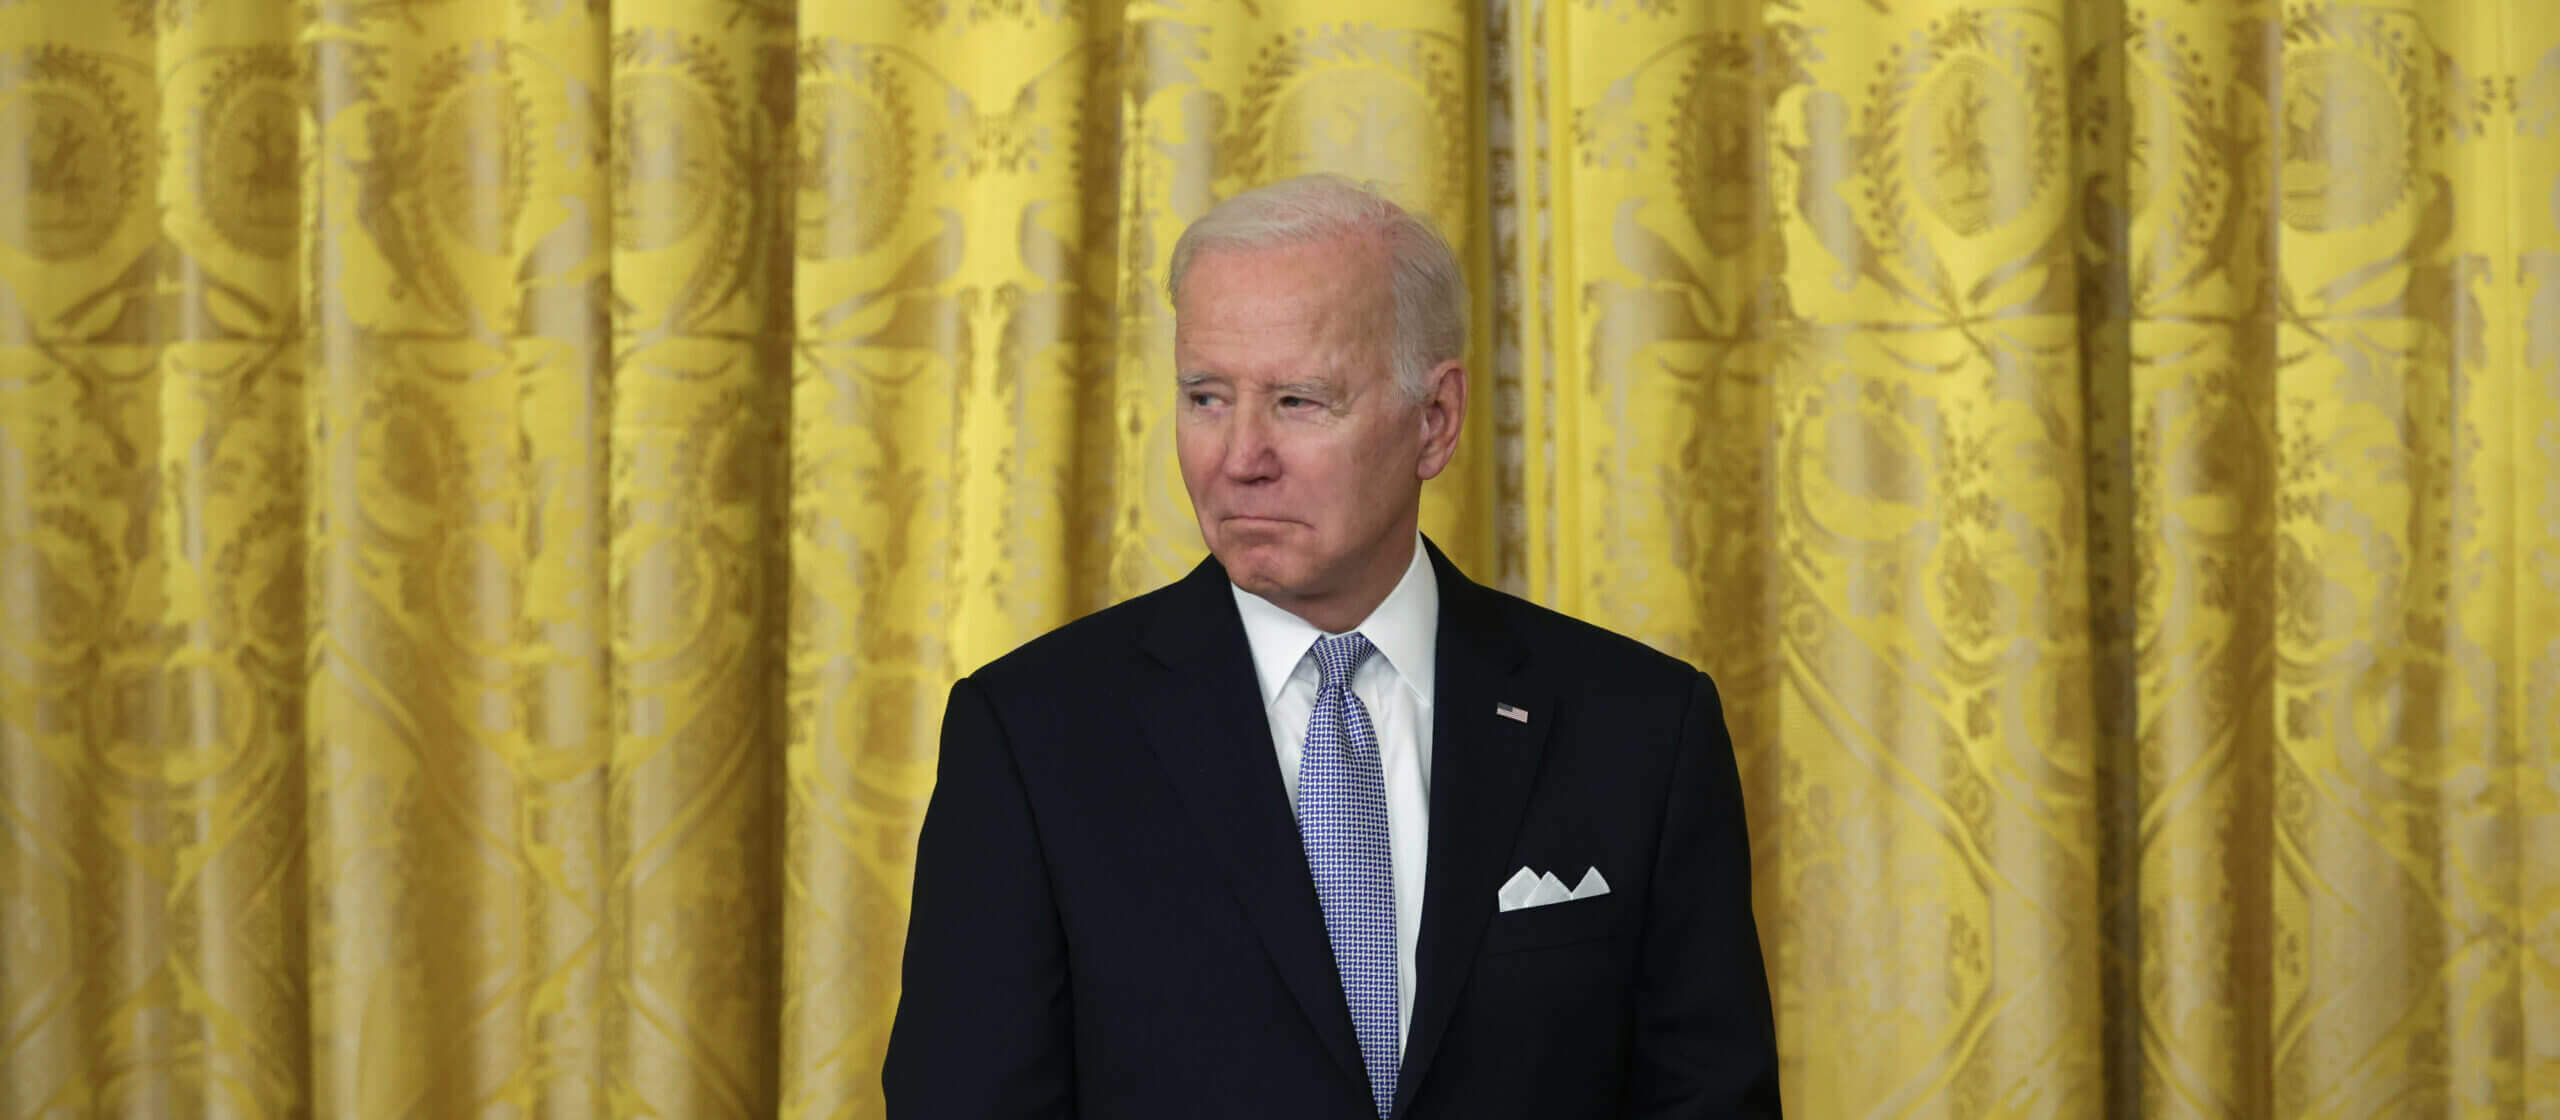 Congress Caught Off-Guard by Biden's $5 Trillion Tax Increase Proposal